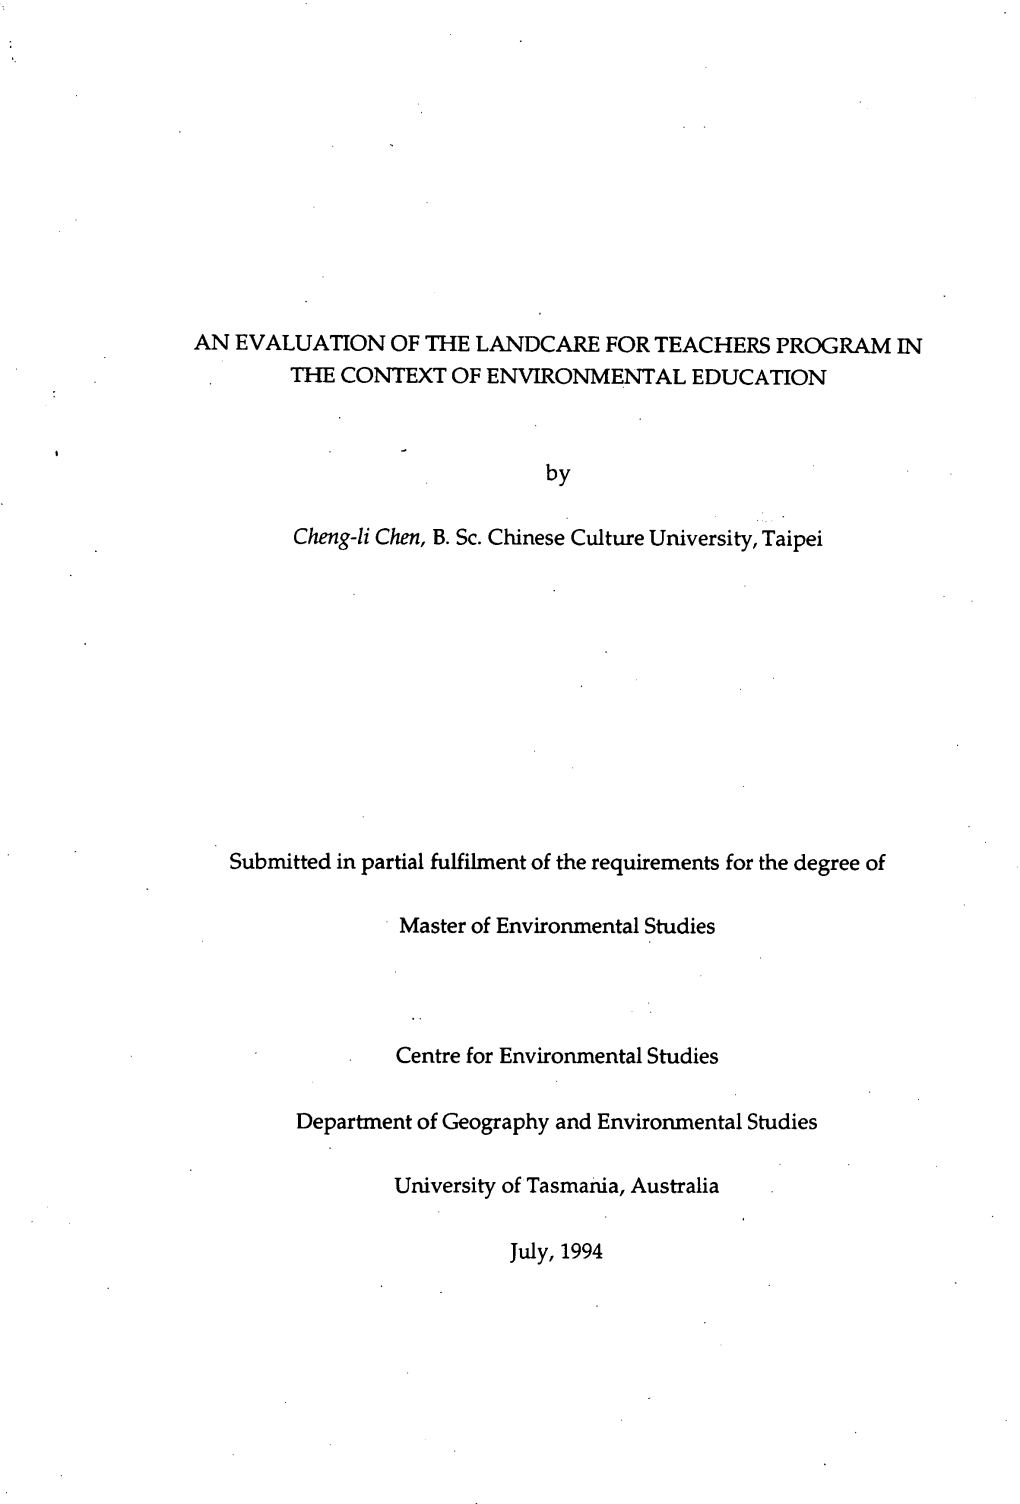 An Evaluation of the Landcare for Teachers Program in the Context of Environmental Education